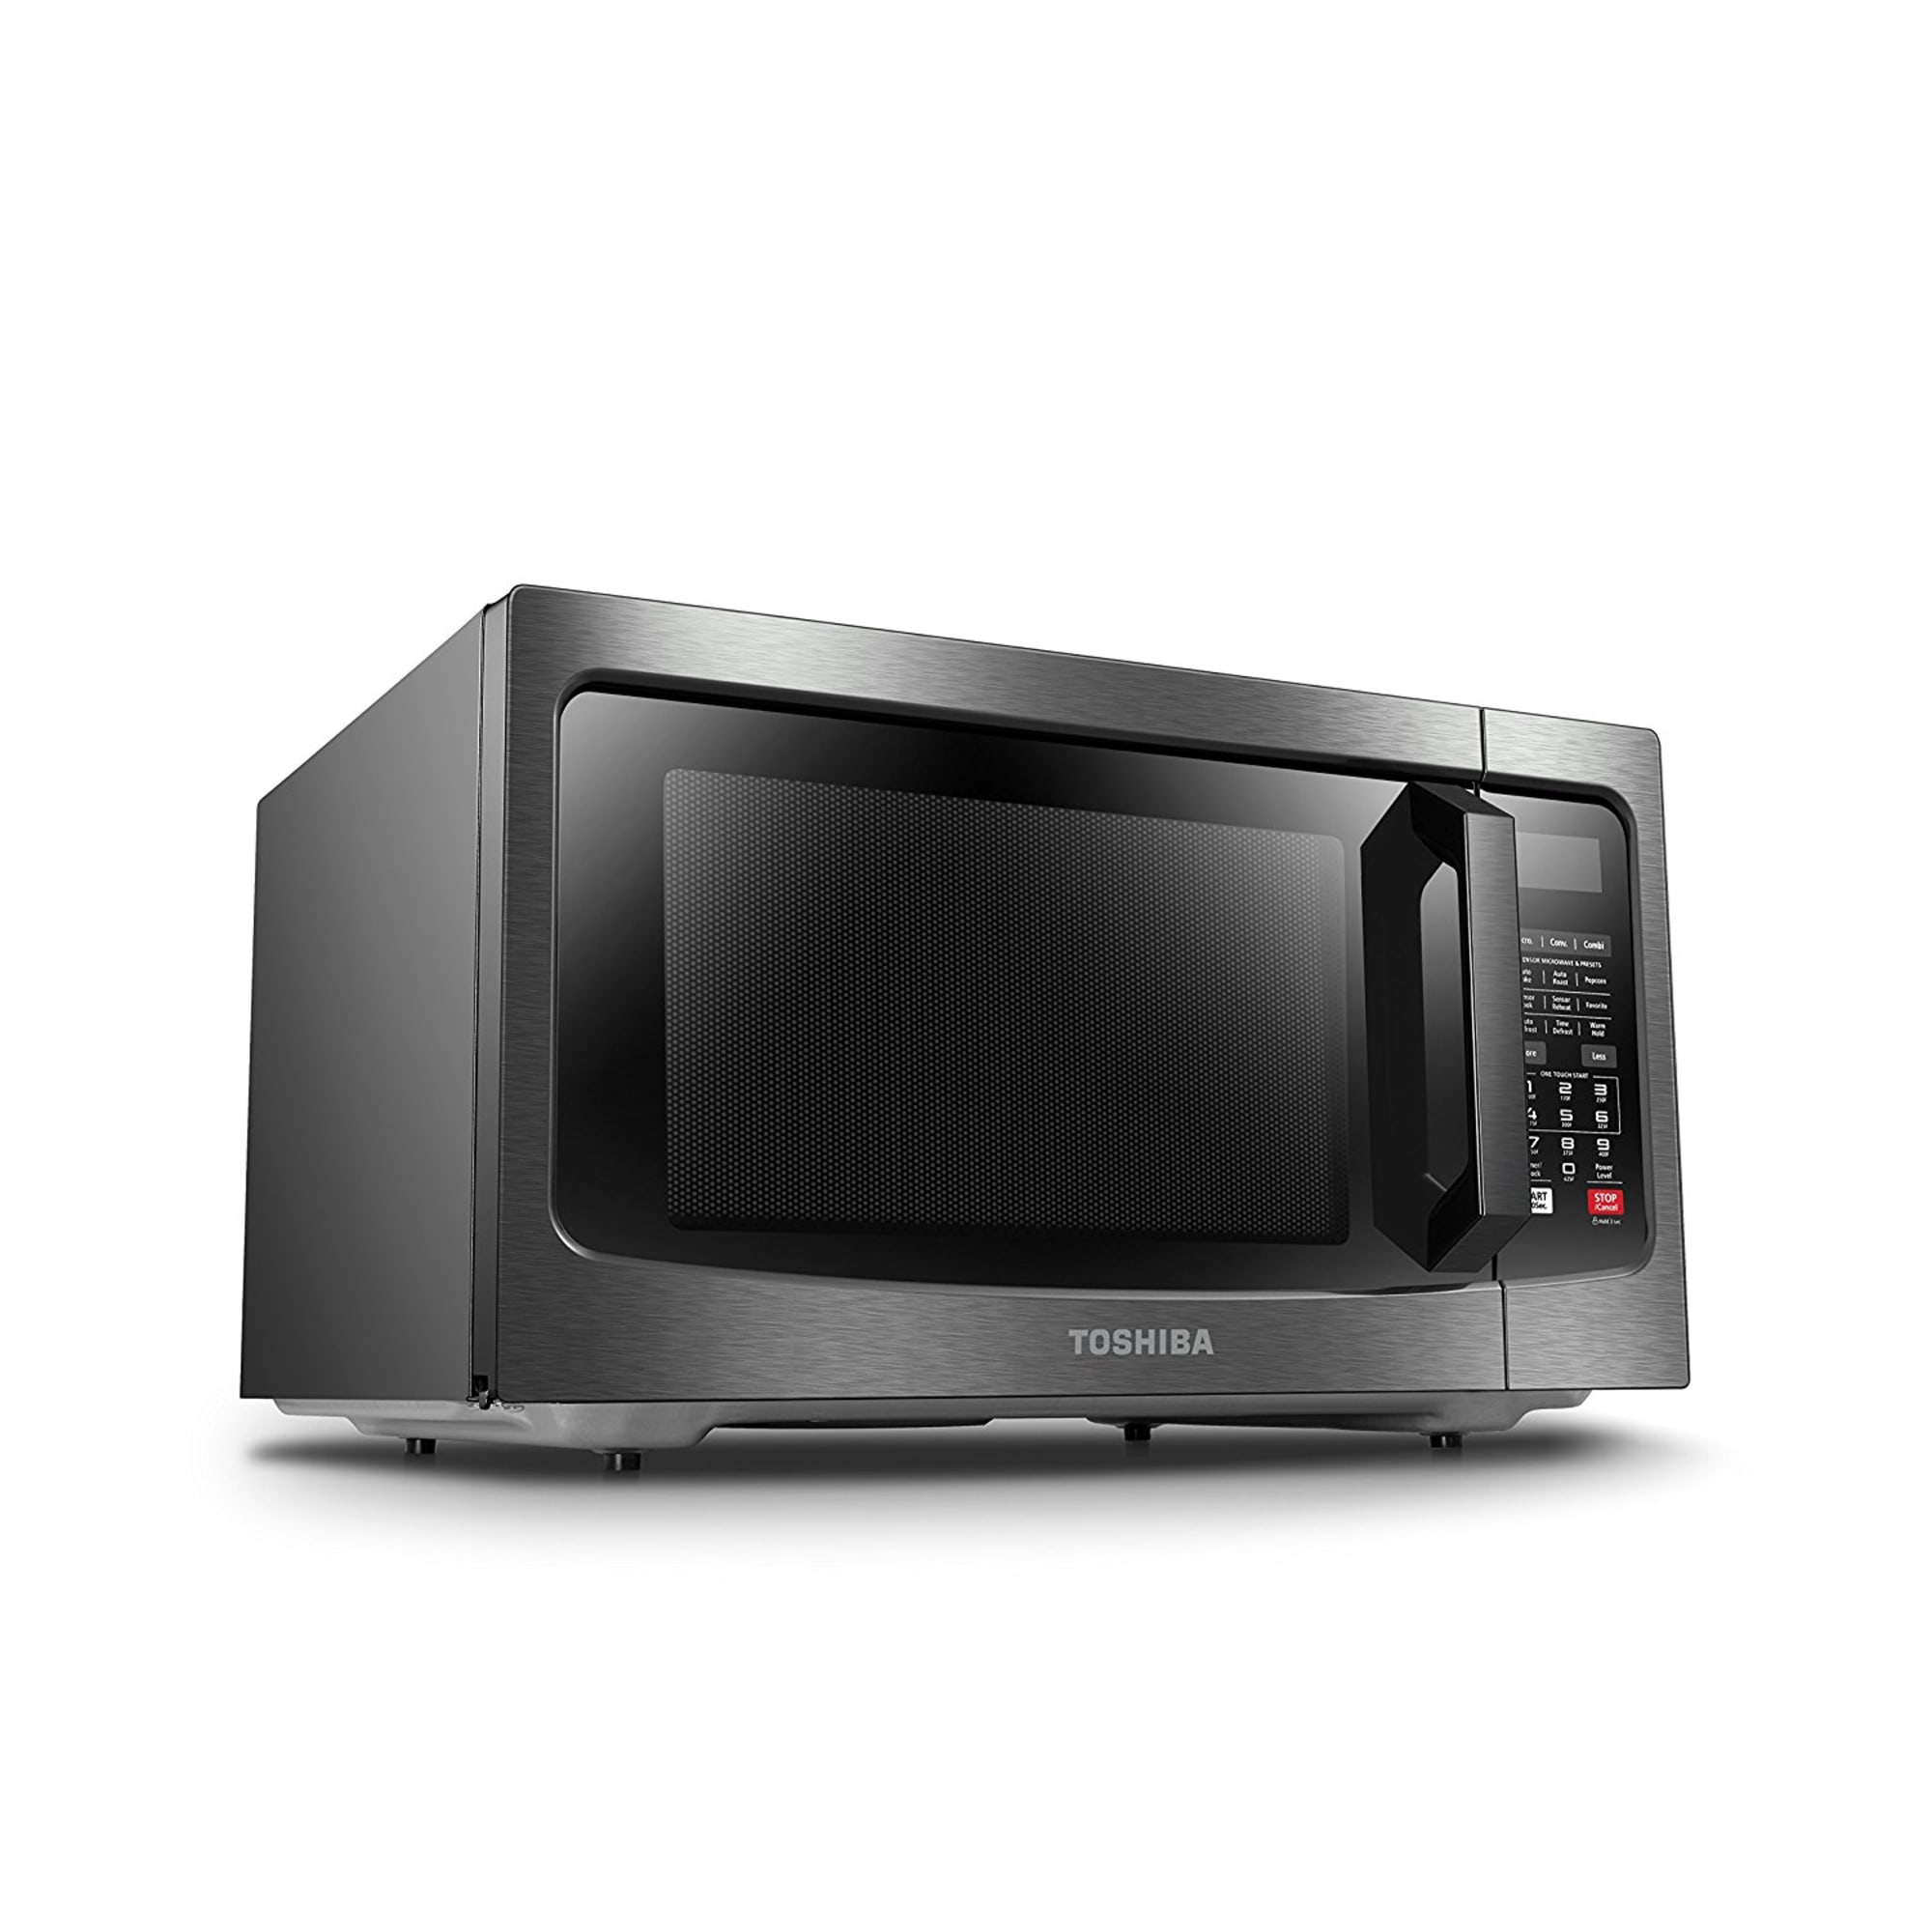 Toshiba ML2-EC42SAESS 1.5 Cu. Ft. Convection Microwave, Stainless Steel - image 4 of 8